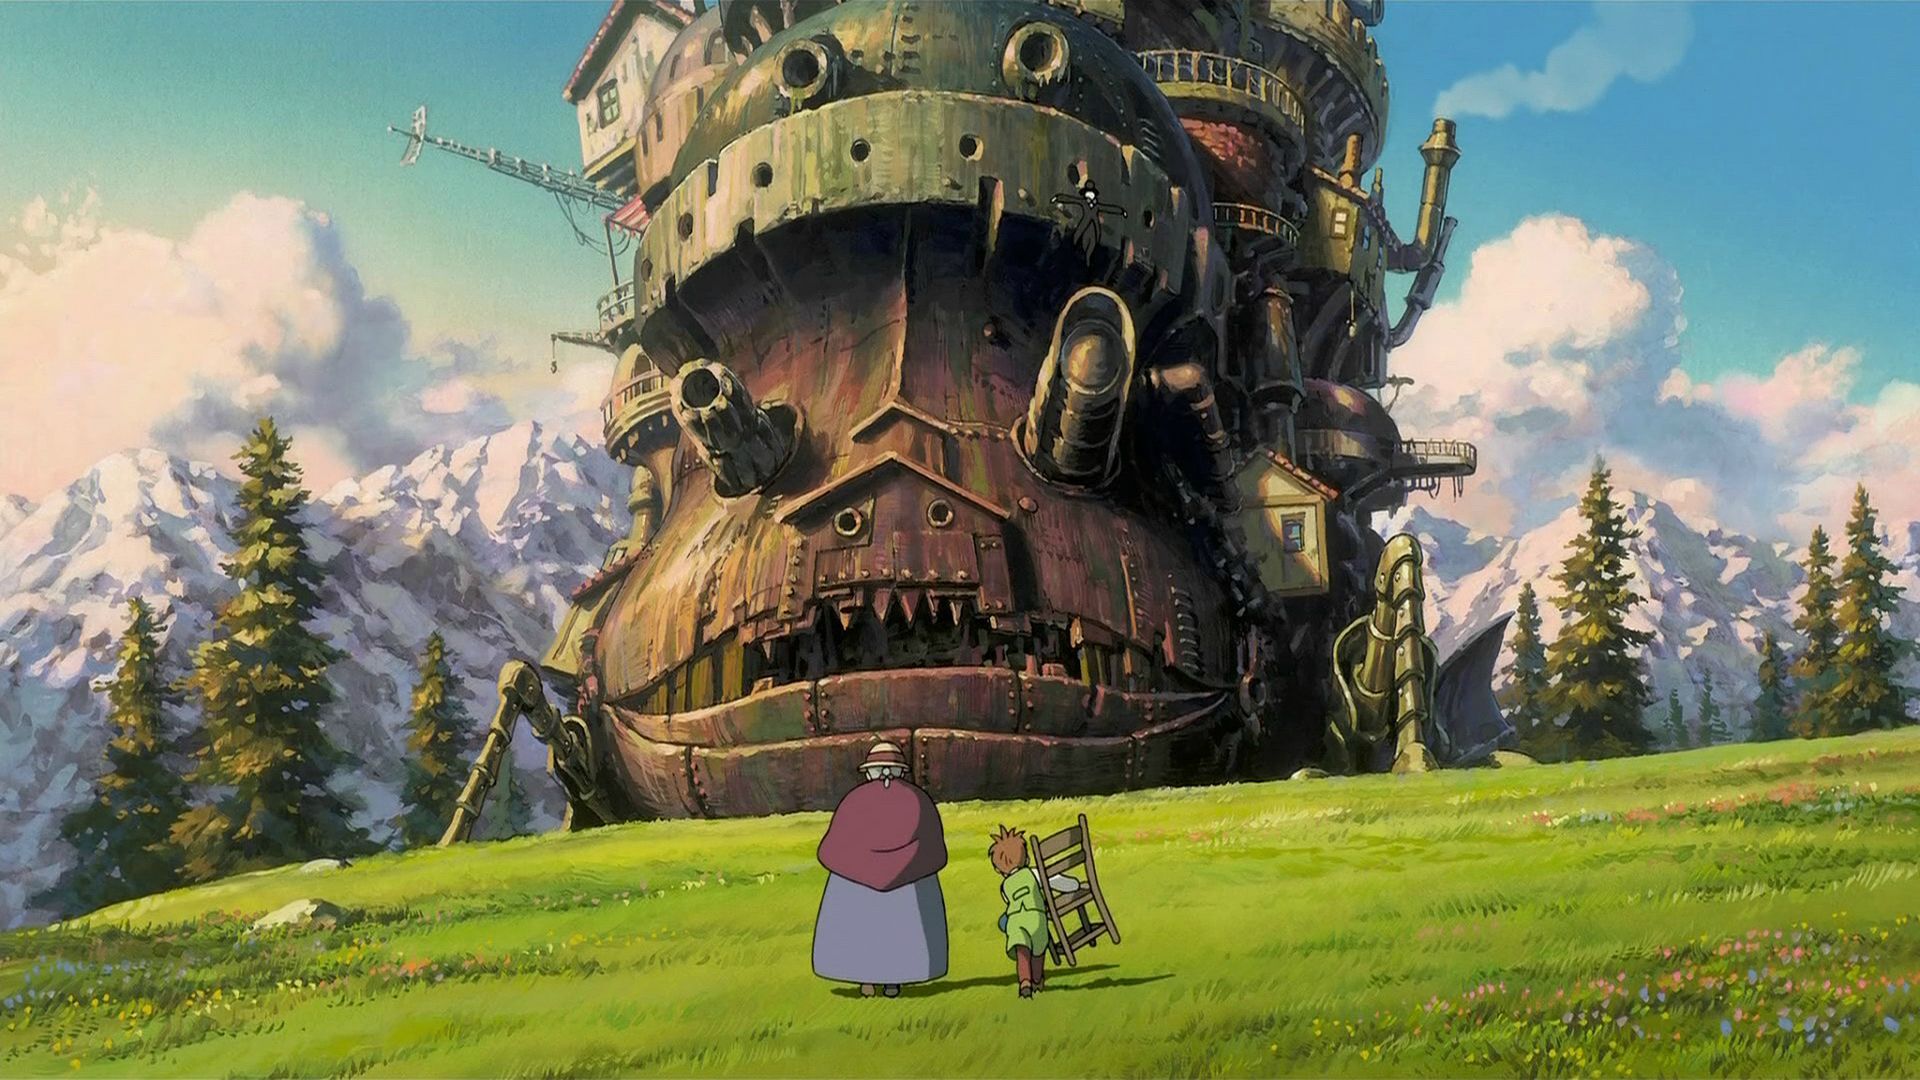 The Films of Hayao Miyazaki Ranked from Worst to Best